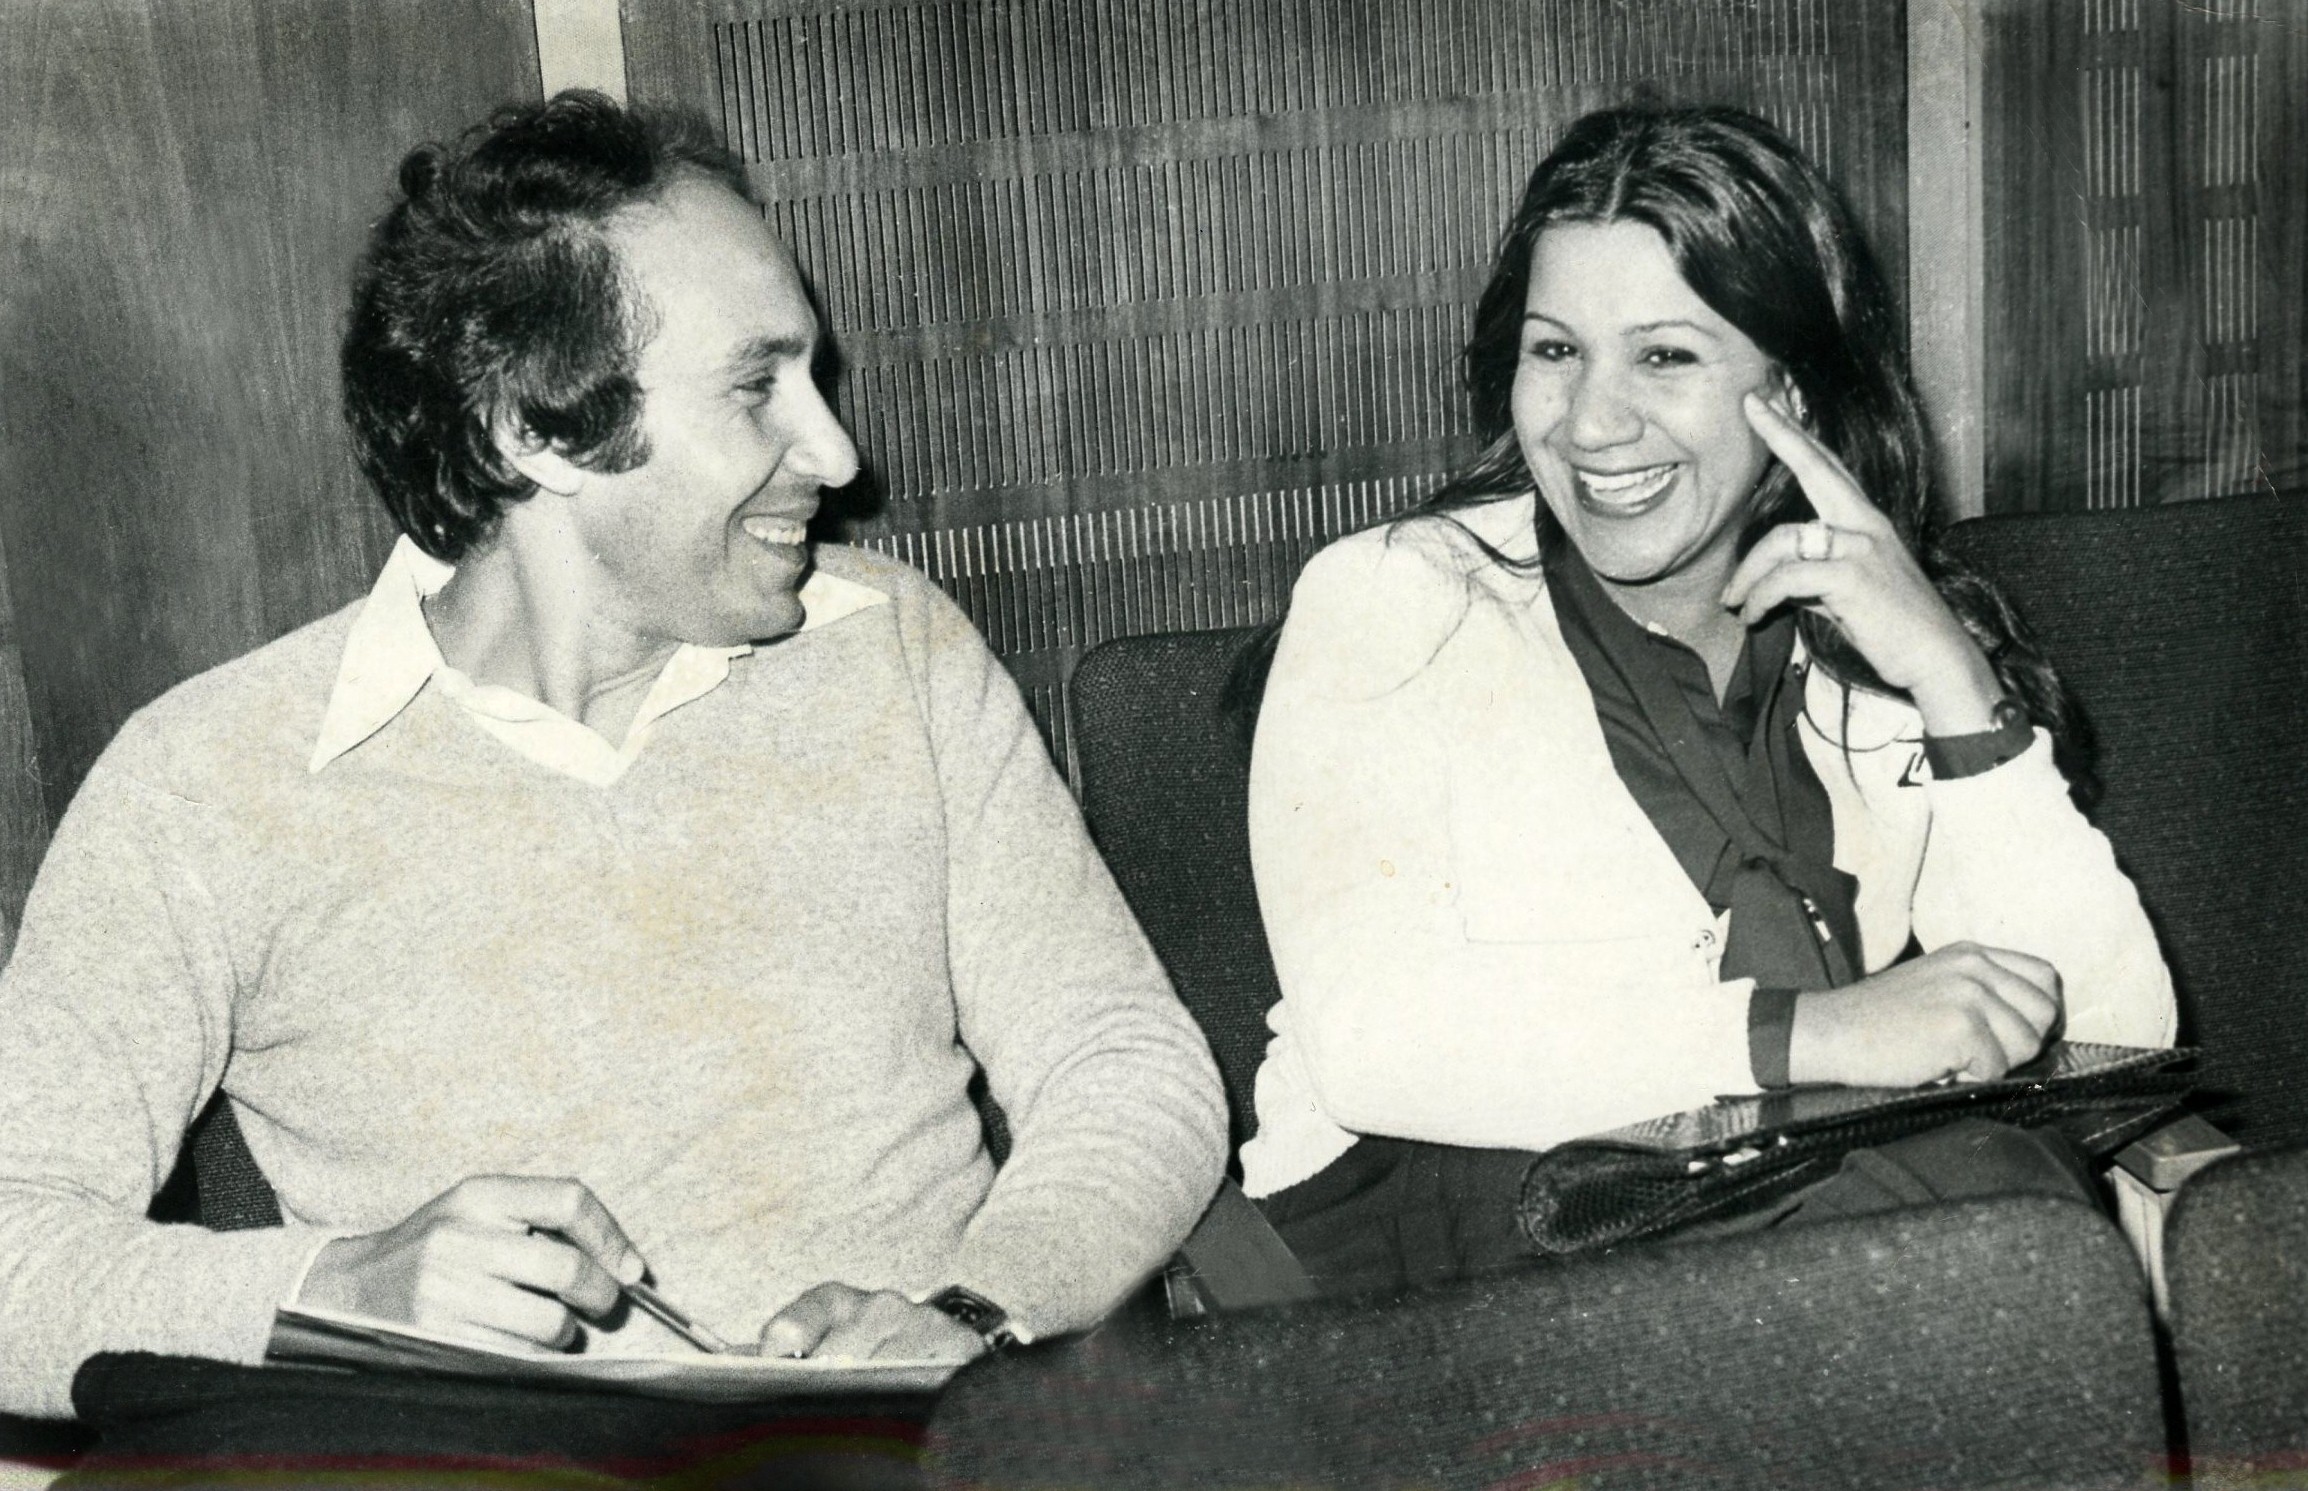 Sharing a moment with the Arabian Gulf most accomplished actress Sou'ad Abdullah in 1978